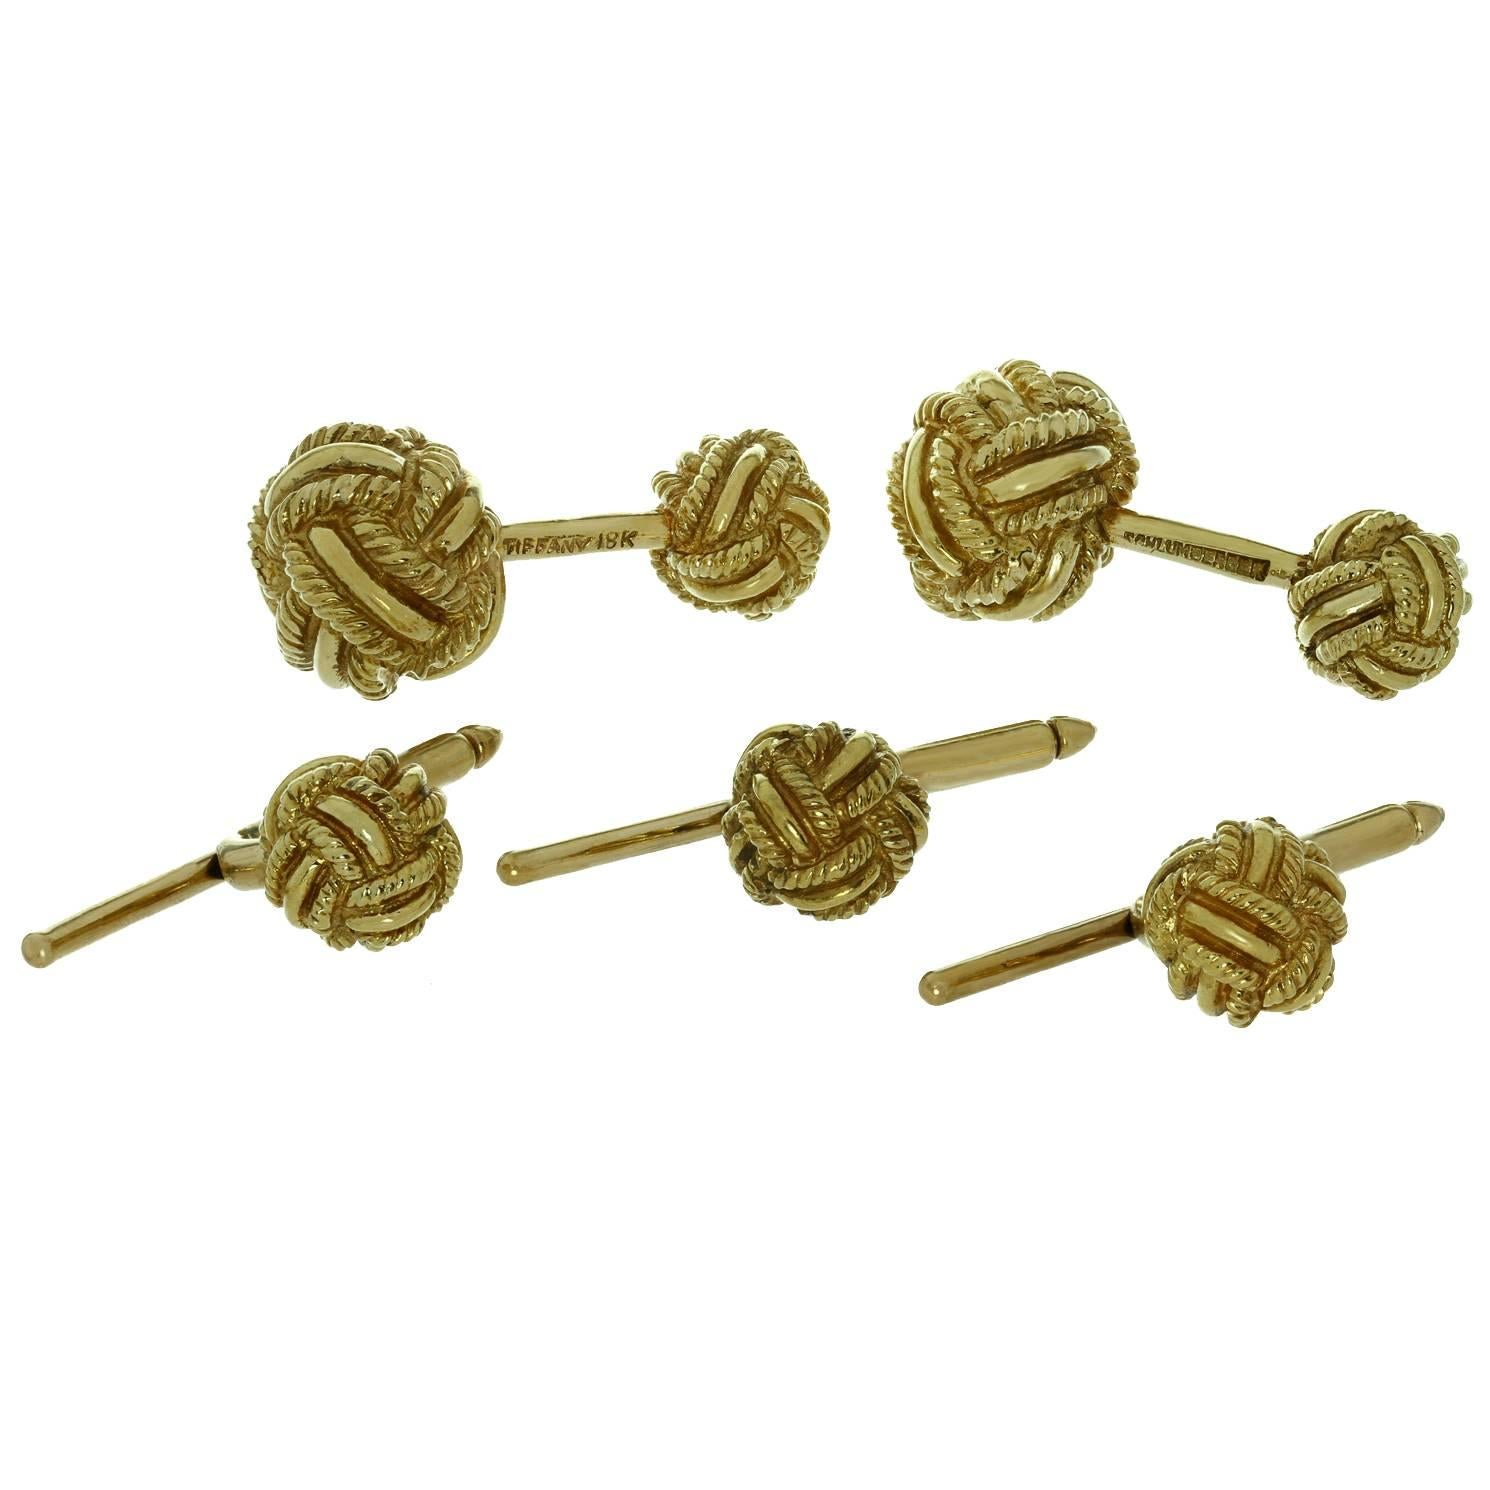 Tiffany & Co. Schlumberger Gold Knot Cufflinks and Studs Perfect for Fathers Day